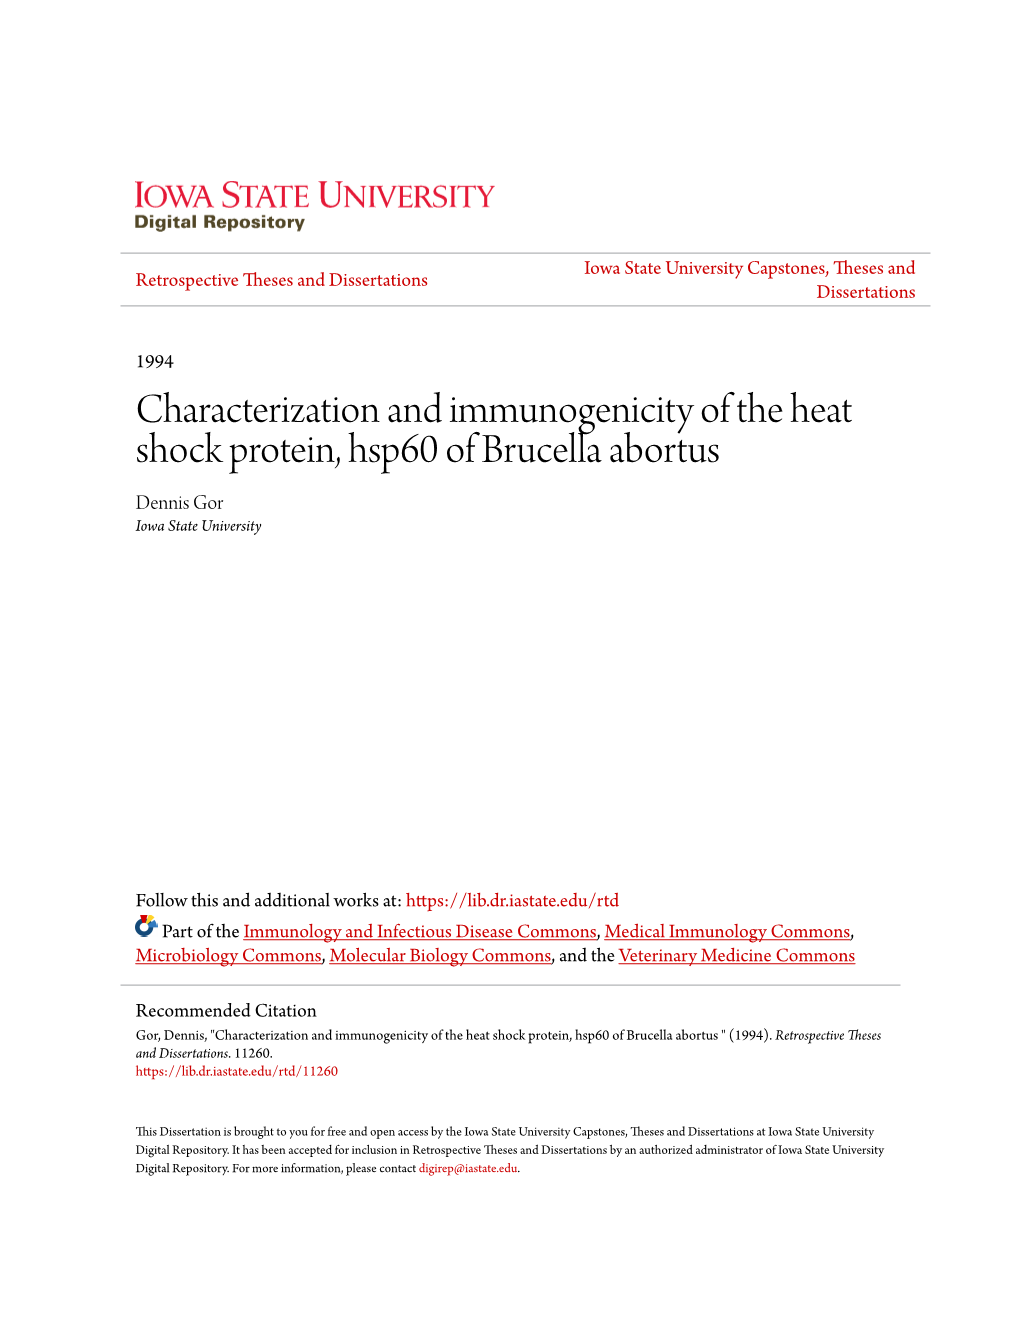 Characterization and Immunogenicity of the Heat Shock Protein, Hsp60 of Brucella Abortus Dennis Gor Iowa State University